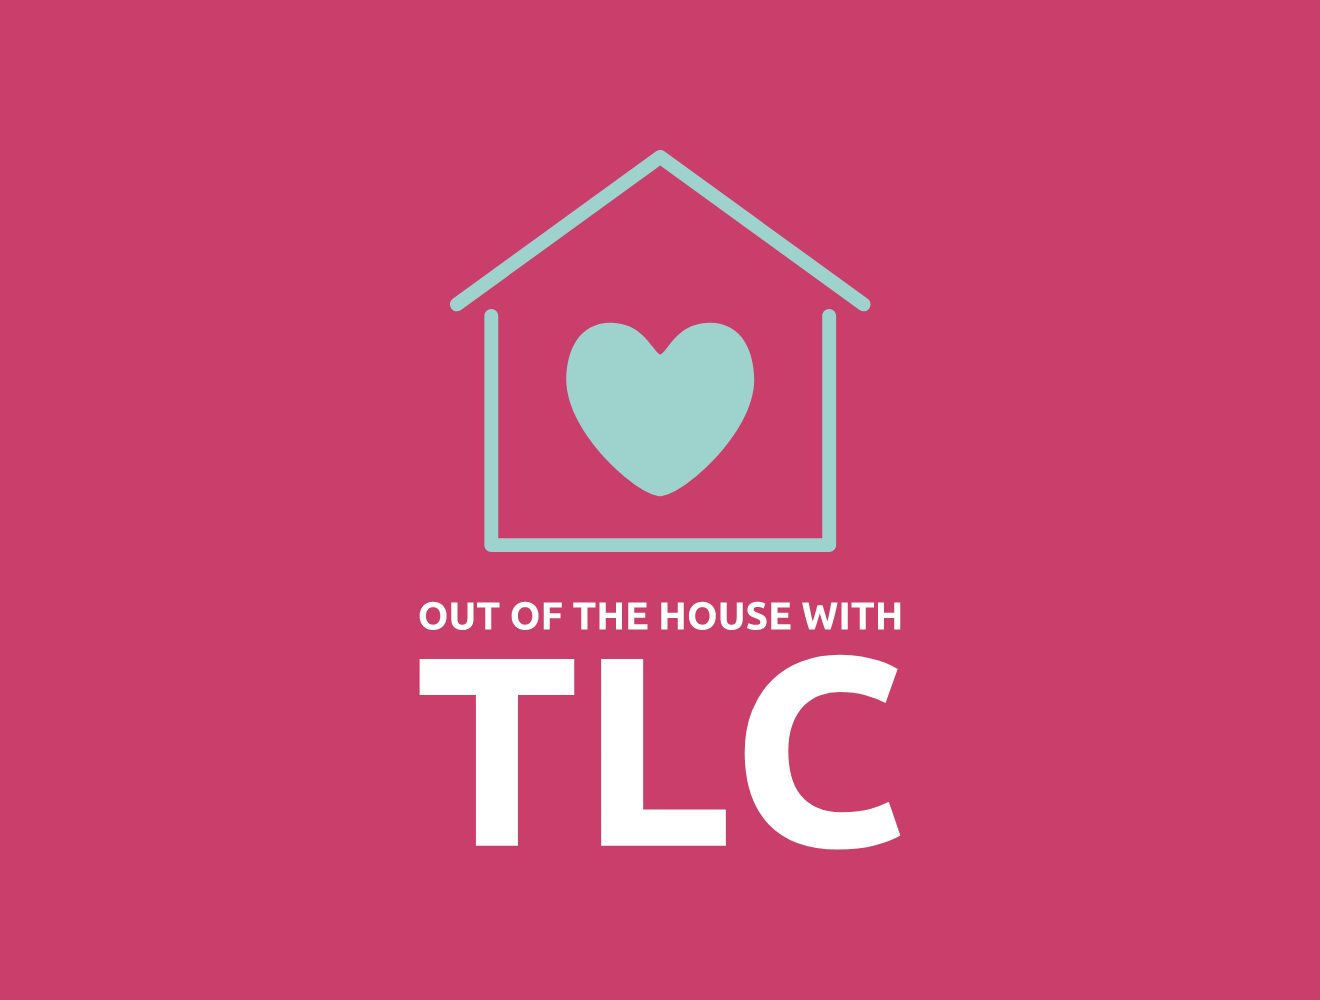 Out of the House with TLC